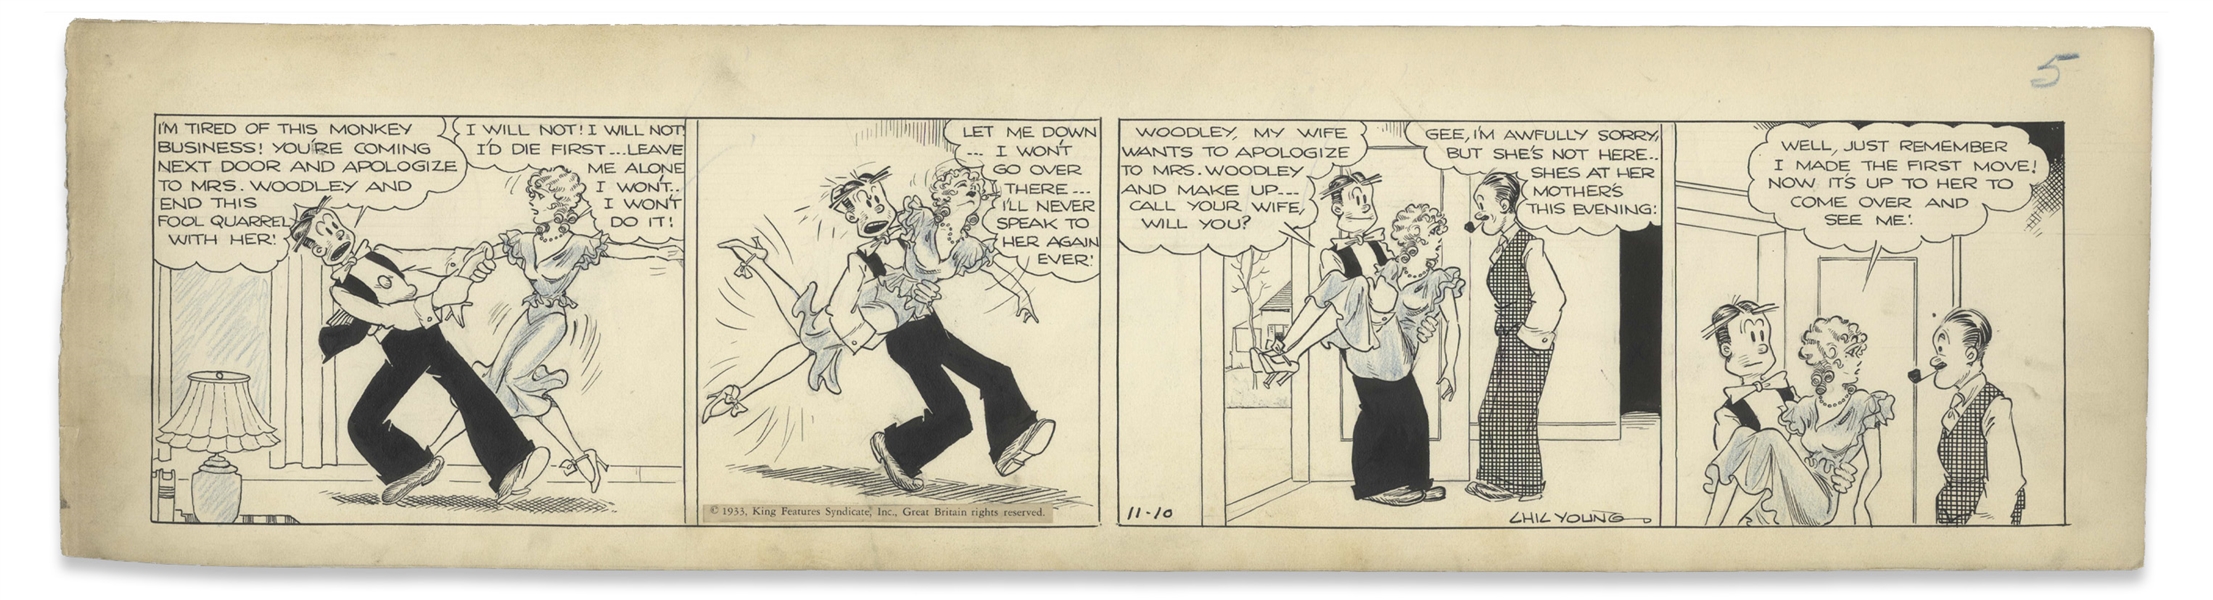 Chic Young Hand-Drawn ''Blondie'' Comic Strip From 1933 -- Featuring Dagwood, Blondie & Herb Woodley